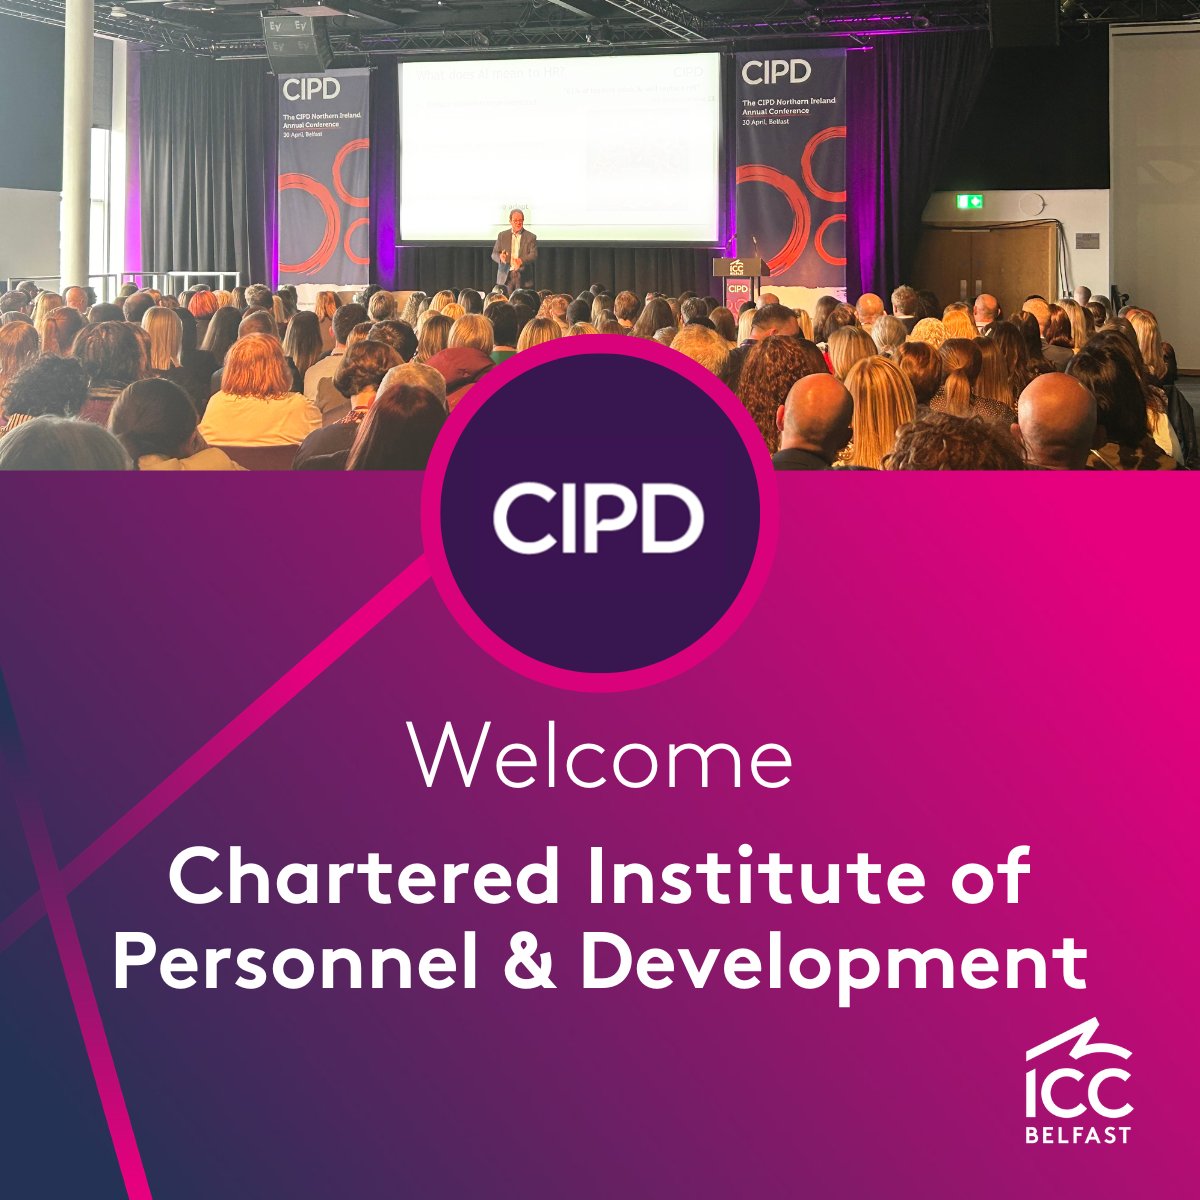 Today we welcome @CIPD_NI to ICC Belfast for their biggest ever Annual Conference 👋 This conference will include a series of enlightening keynote presentations, engaging panel discussions, and interactive sessions. We hope all attendees have a great day!